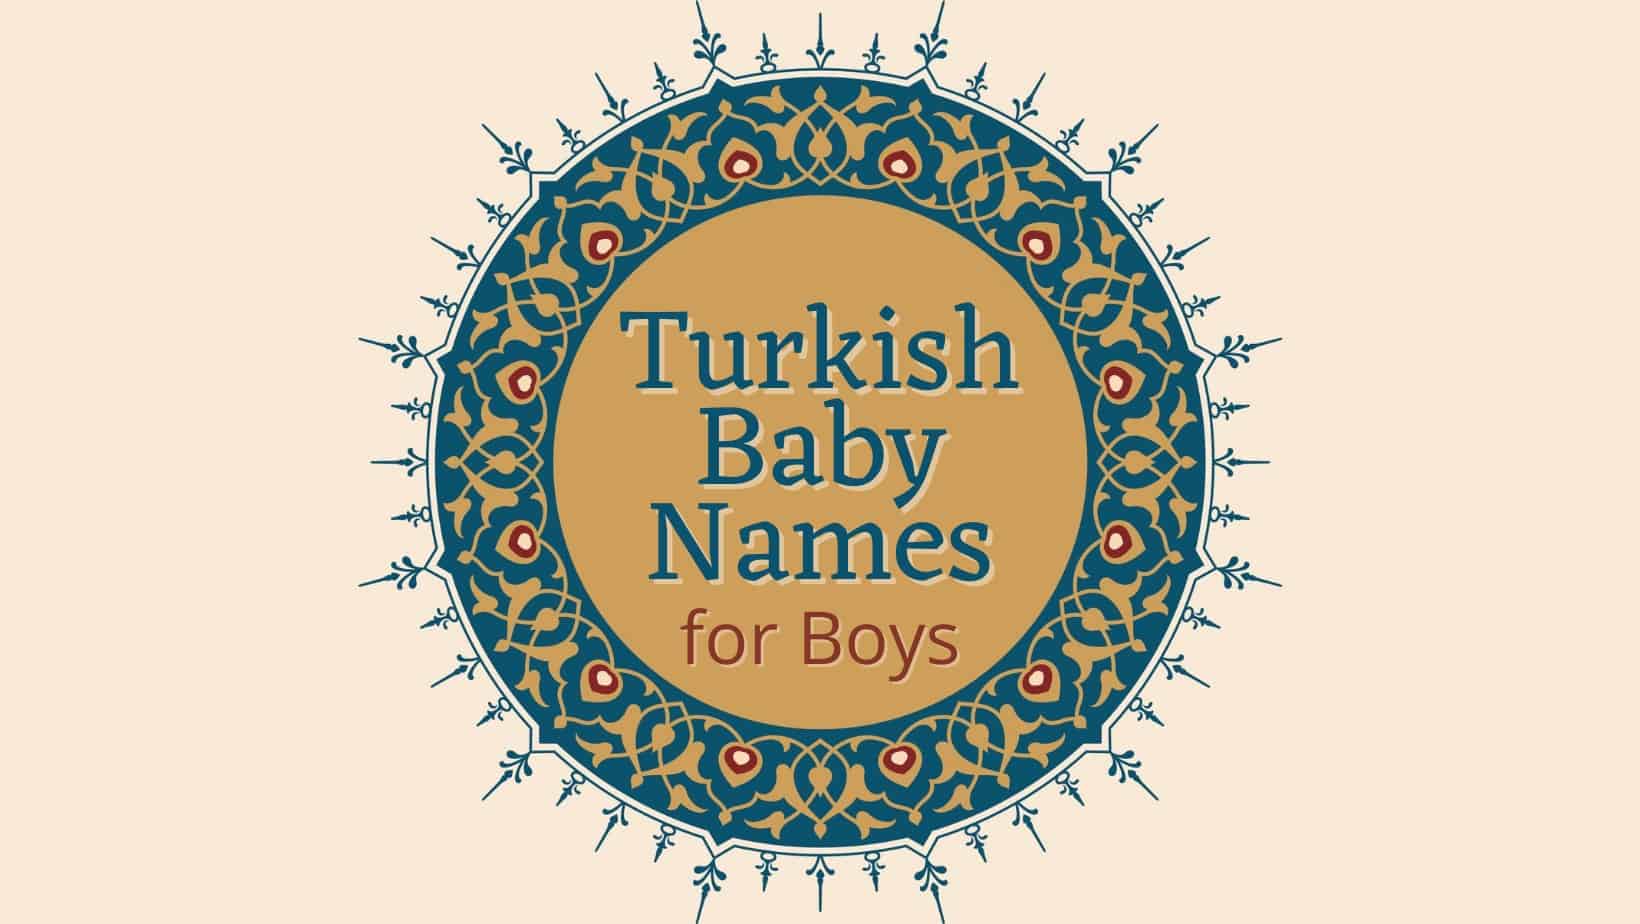 Turkish Baby Names for boys